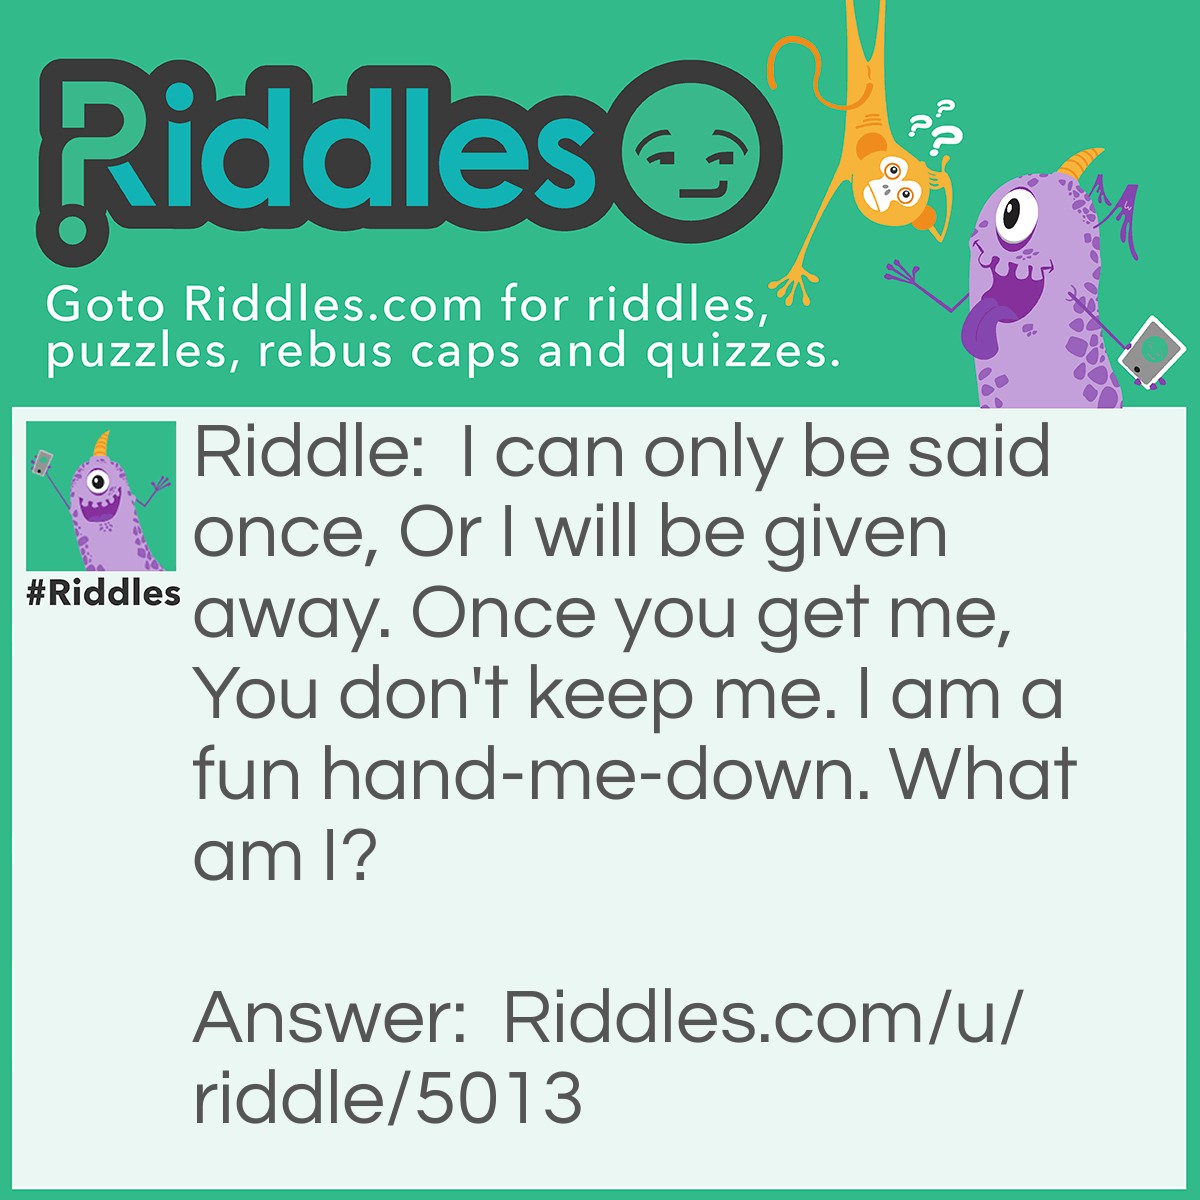 Riddle: I can only be said once, Or I will be given away. Once you get me, You don't keep me. I am a fun hand-me-down. What am I? Answer: A riddle.